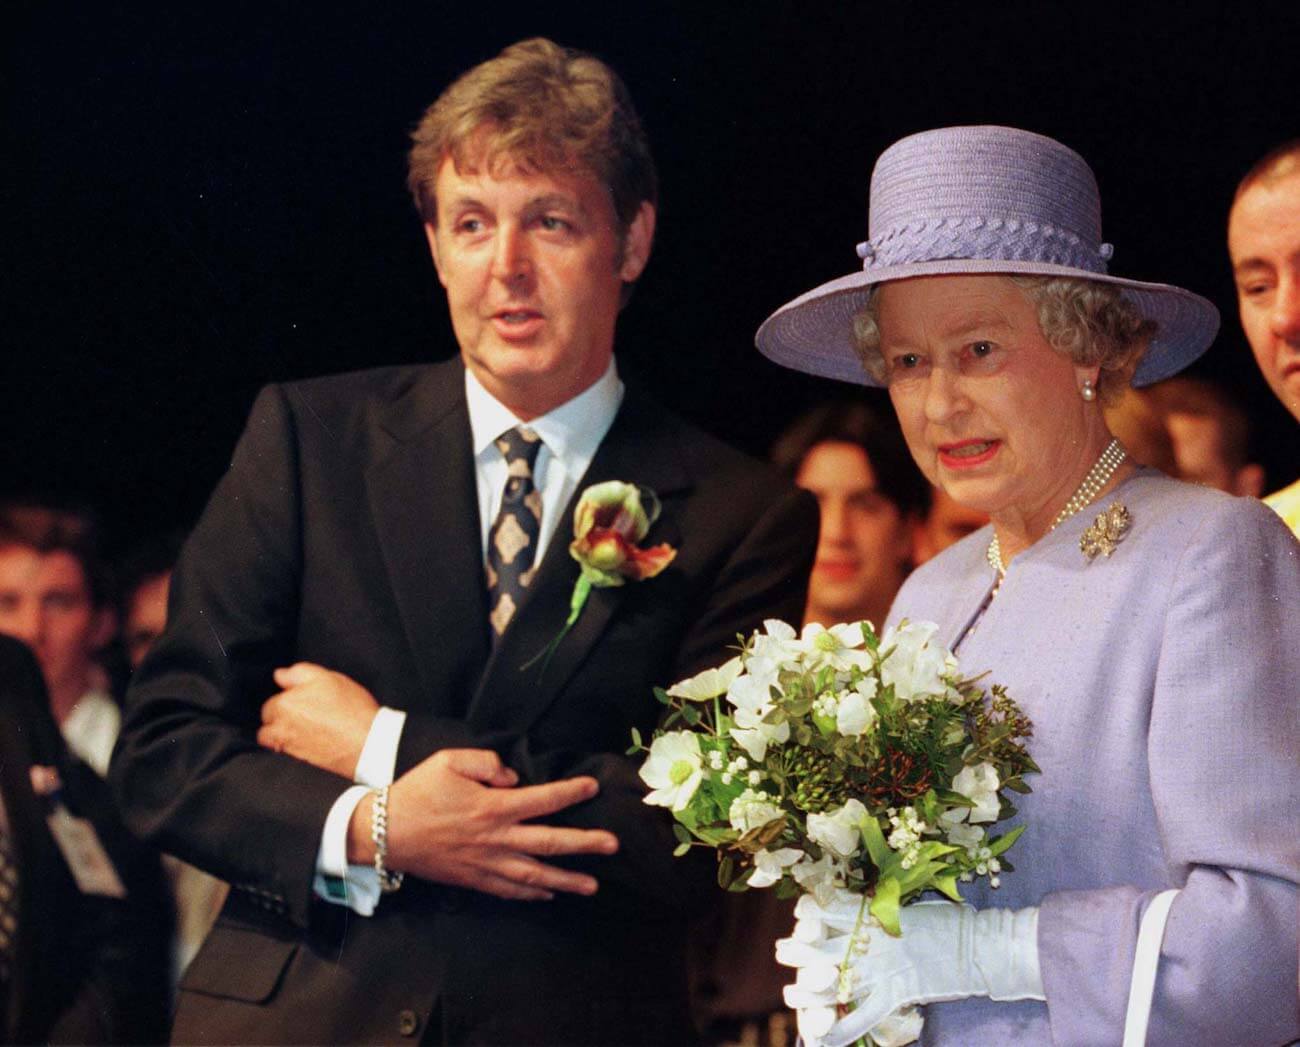 Paul McCartney and Queen Elizabeth II at the Liverpool Institute for Performing Arts in 1996.